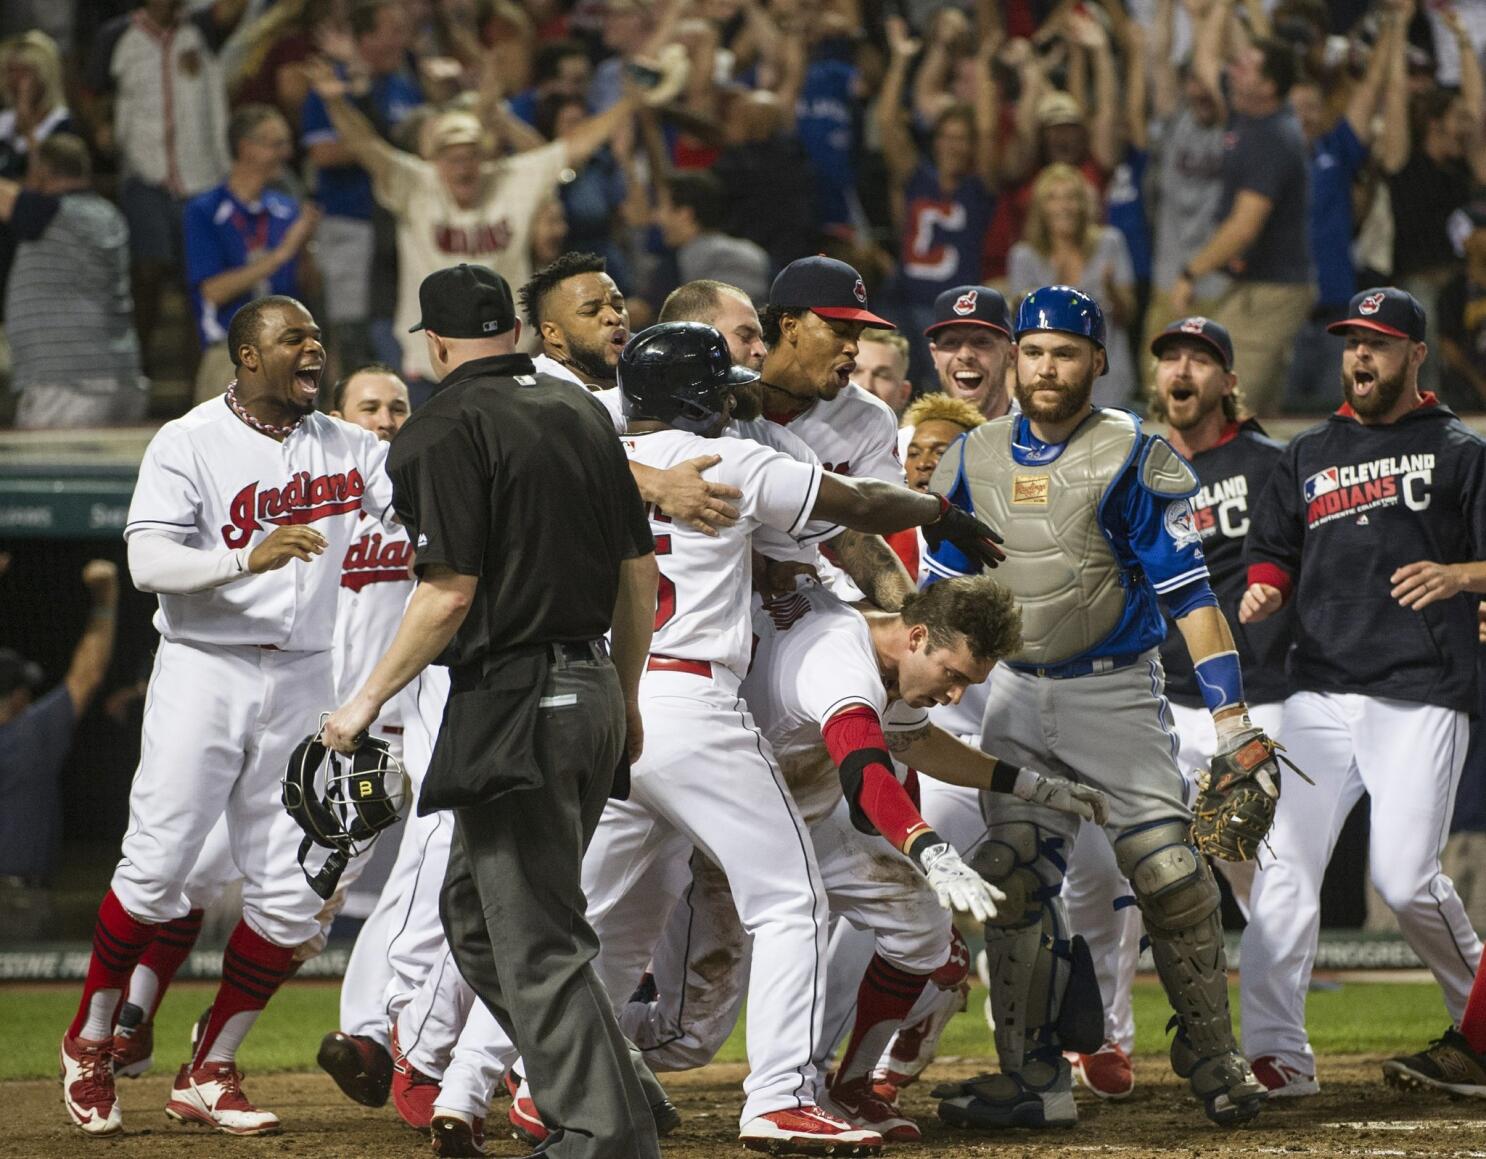 Naquin hits game-ending inside-the-park HR, Indians top Jays - The